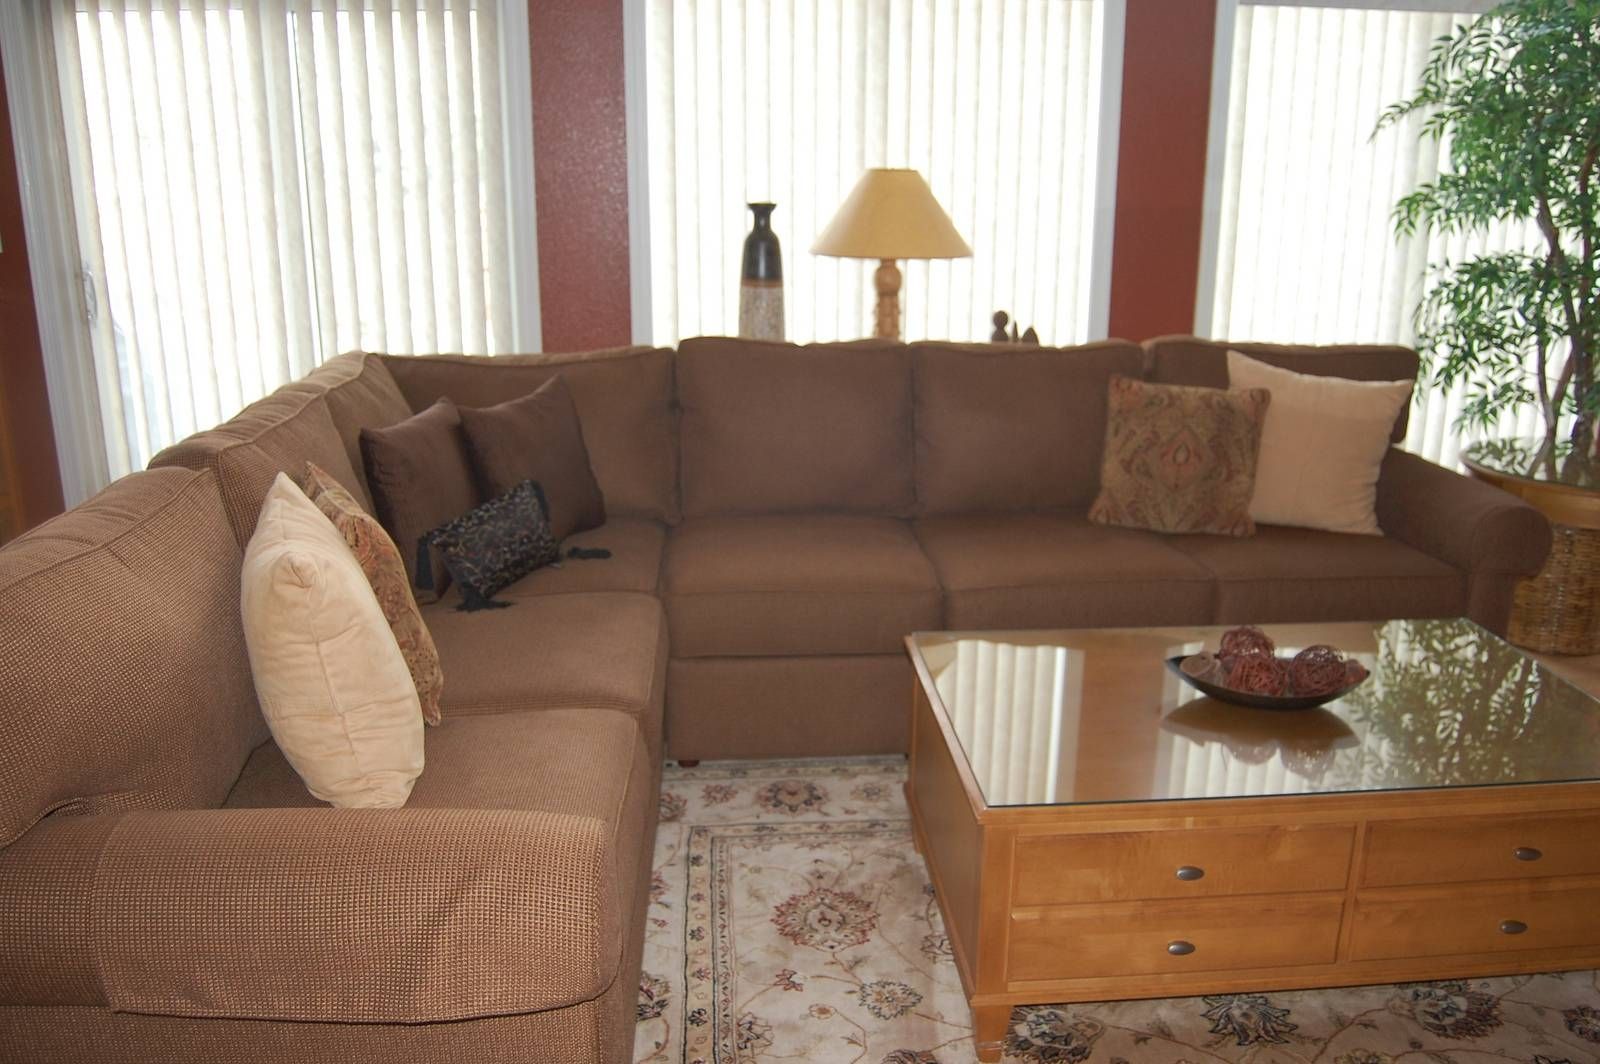 Sofas: Ethan Allen Leather Couch | Ethan Allen Recliner Chairs For Ethan Allen Sofas And Chairs (View 5 of 15)